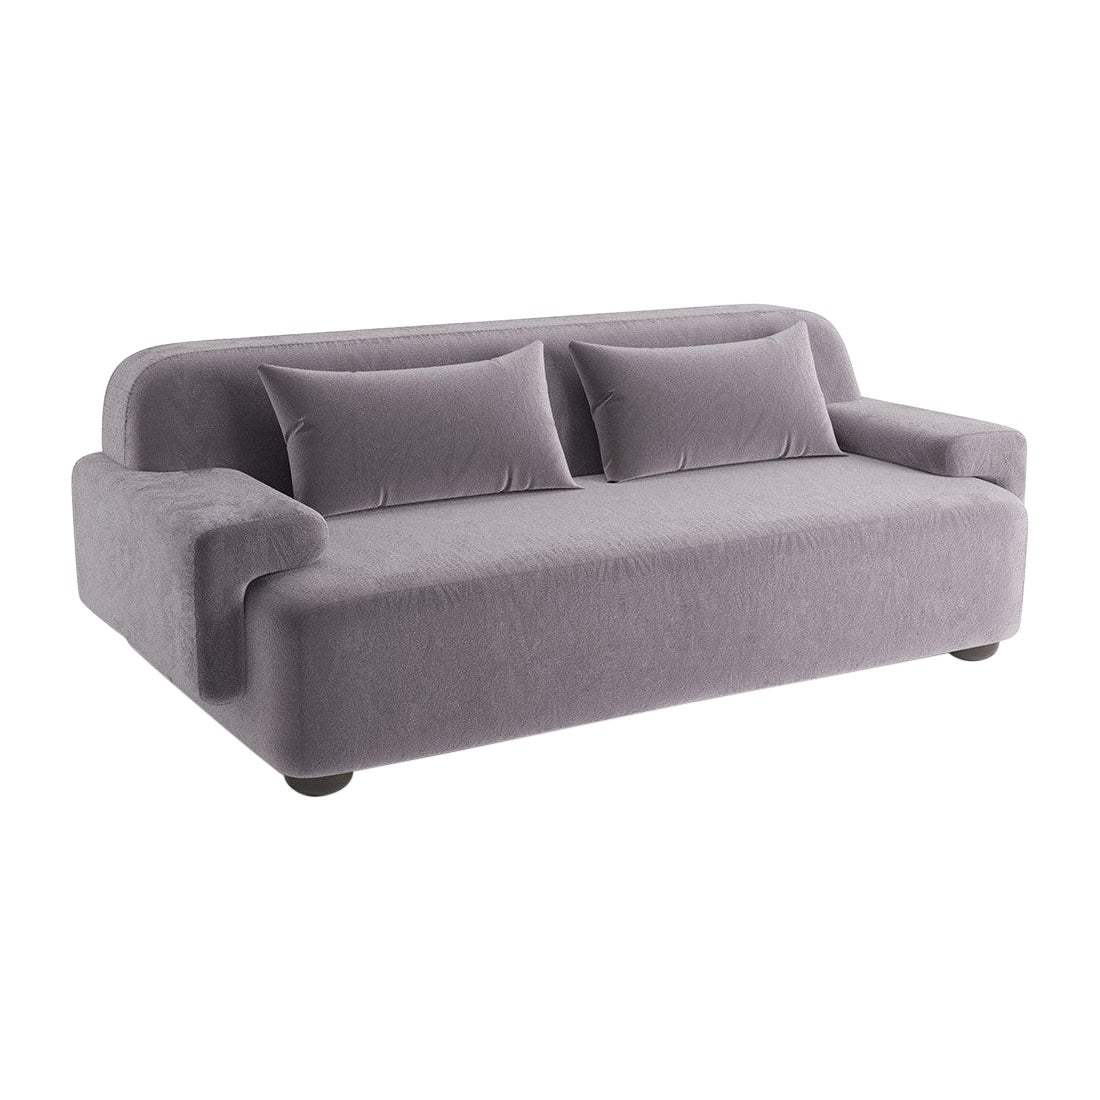 Popus Editions Lena 3 Seater Sofa in Gray Verone Velvet Upholstery For Sale